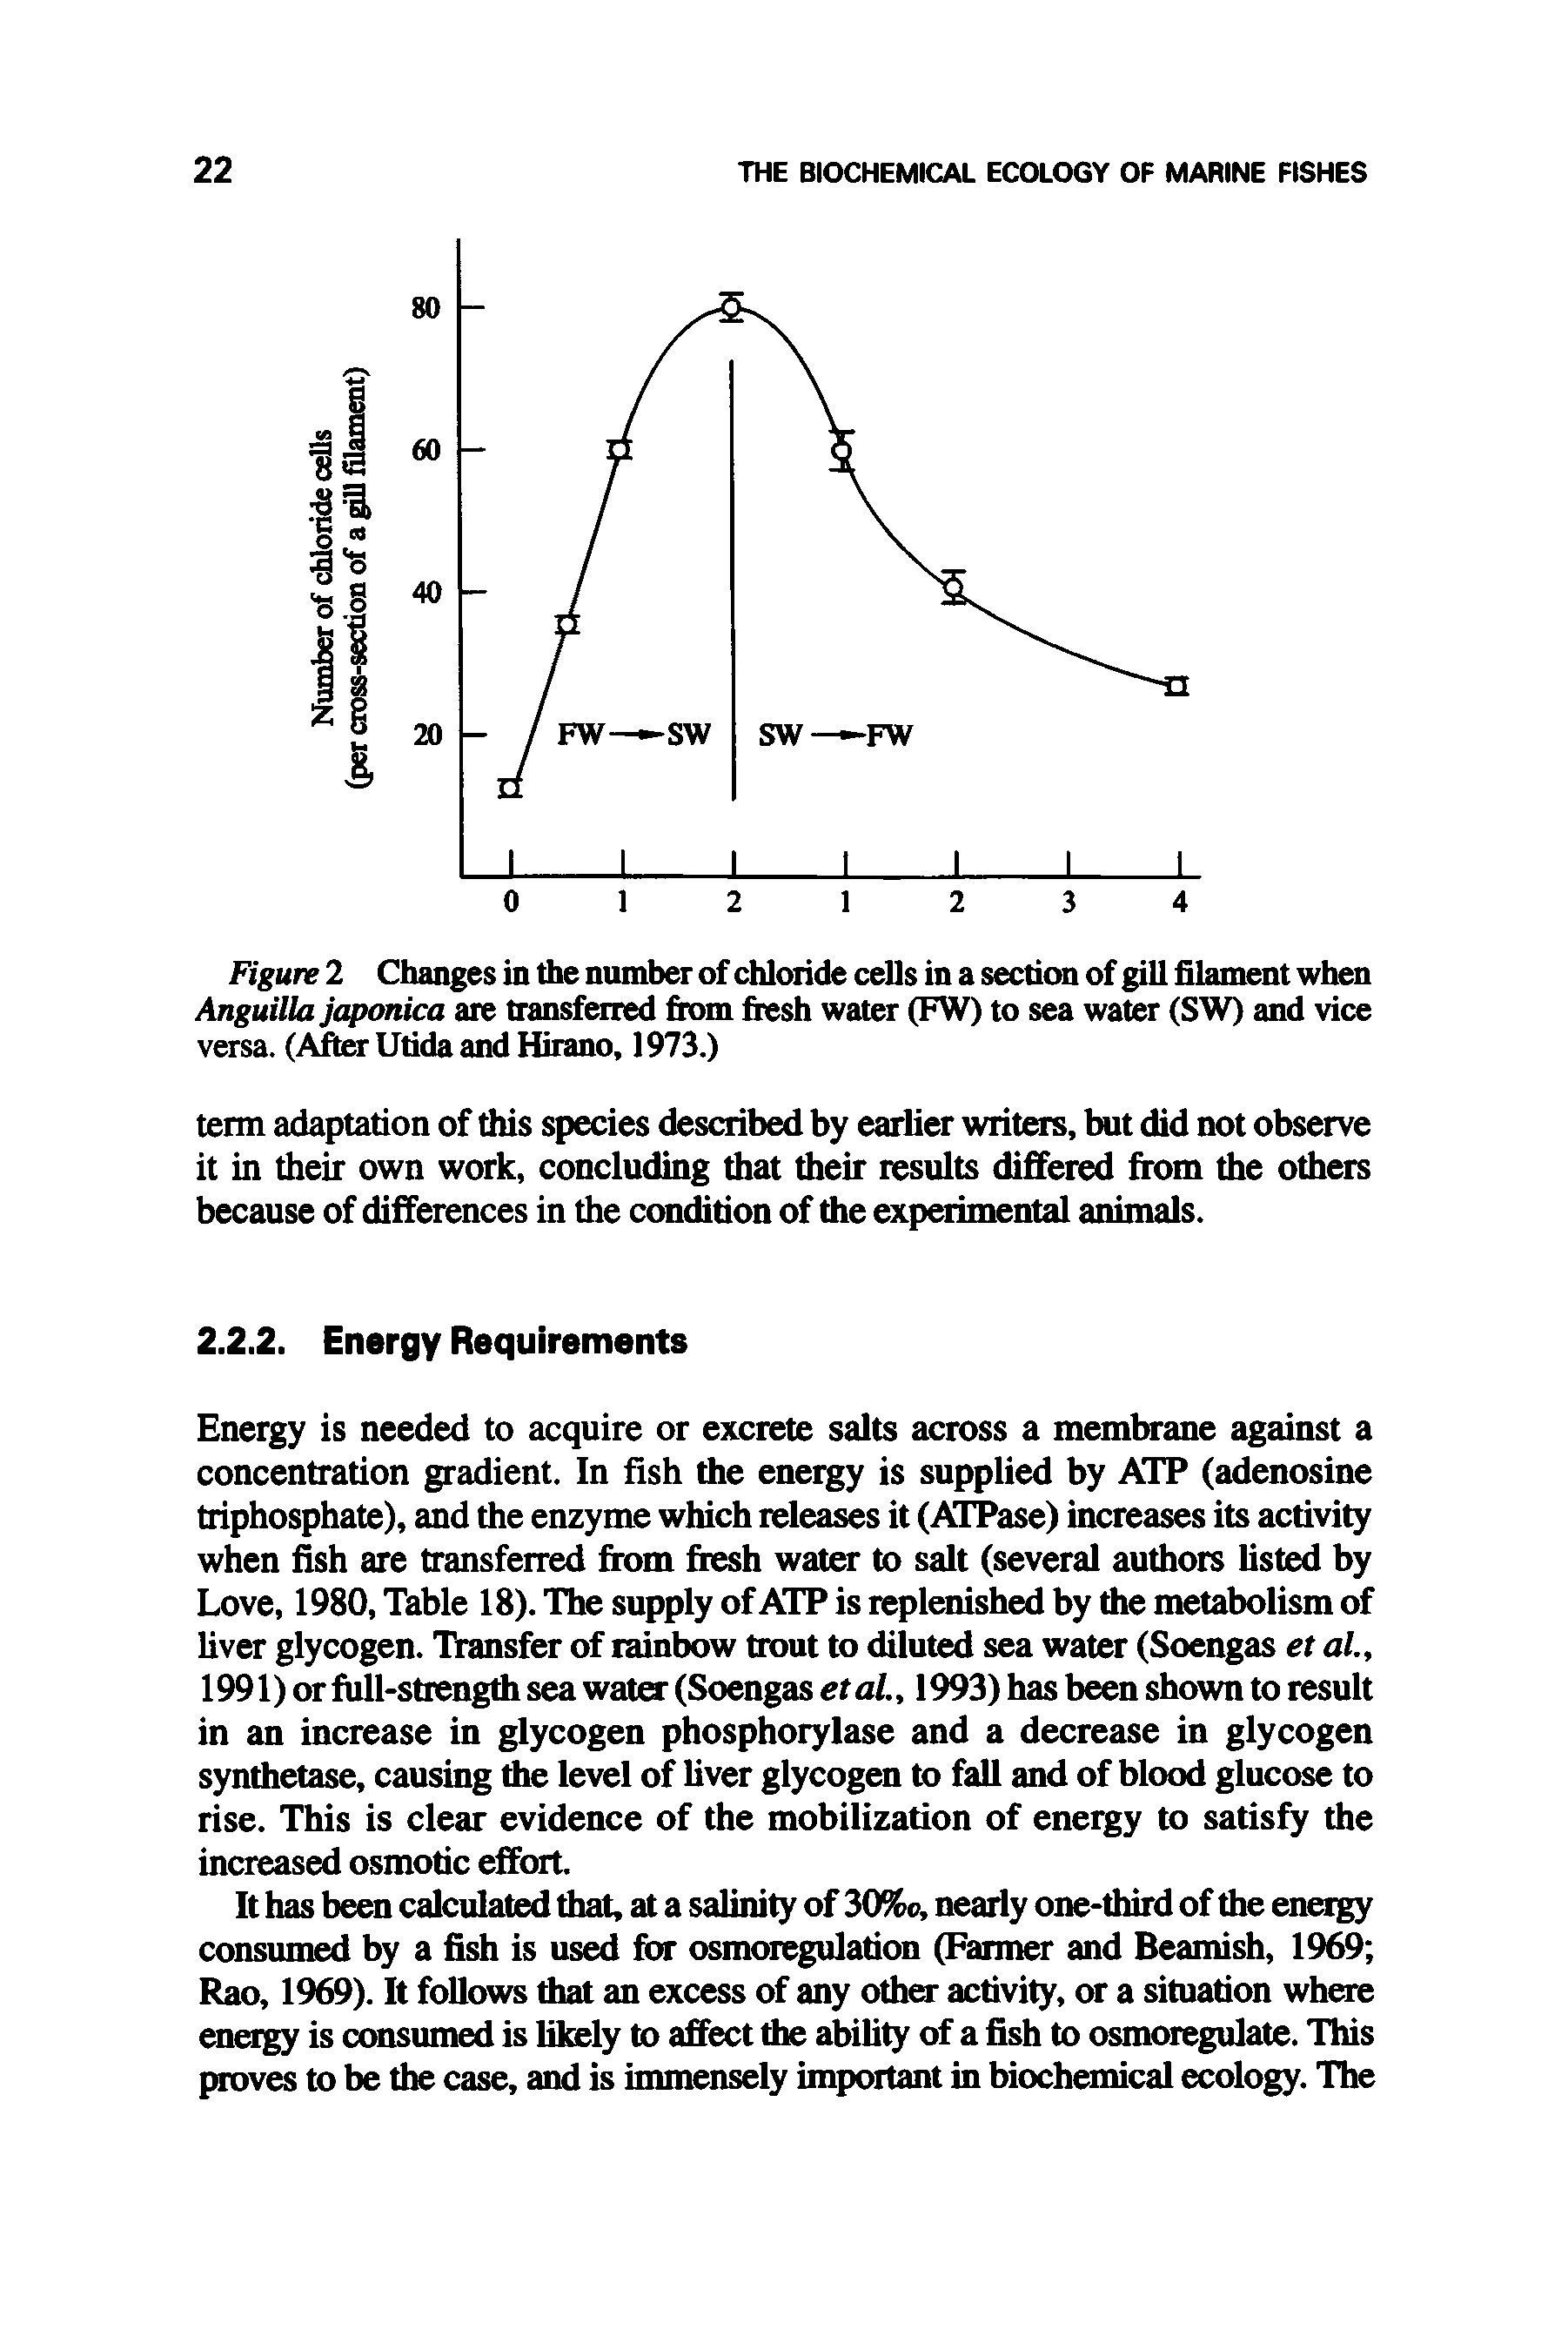 Figure 2 Changes in the number of chloride cells in a section of gill filament when Anguilla japonica are transferred from fresh water (FW) to sea water (SW) and vice versa. (After Utida and Hirano, 1973.)...